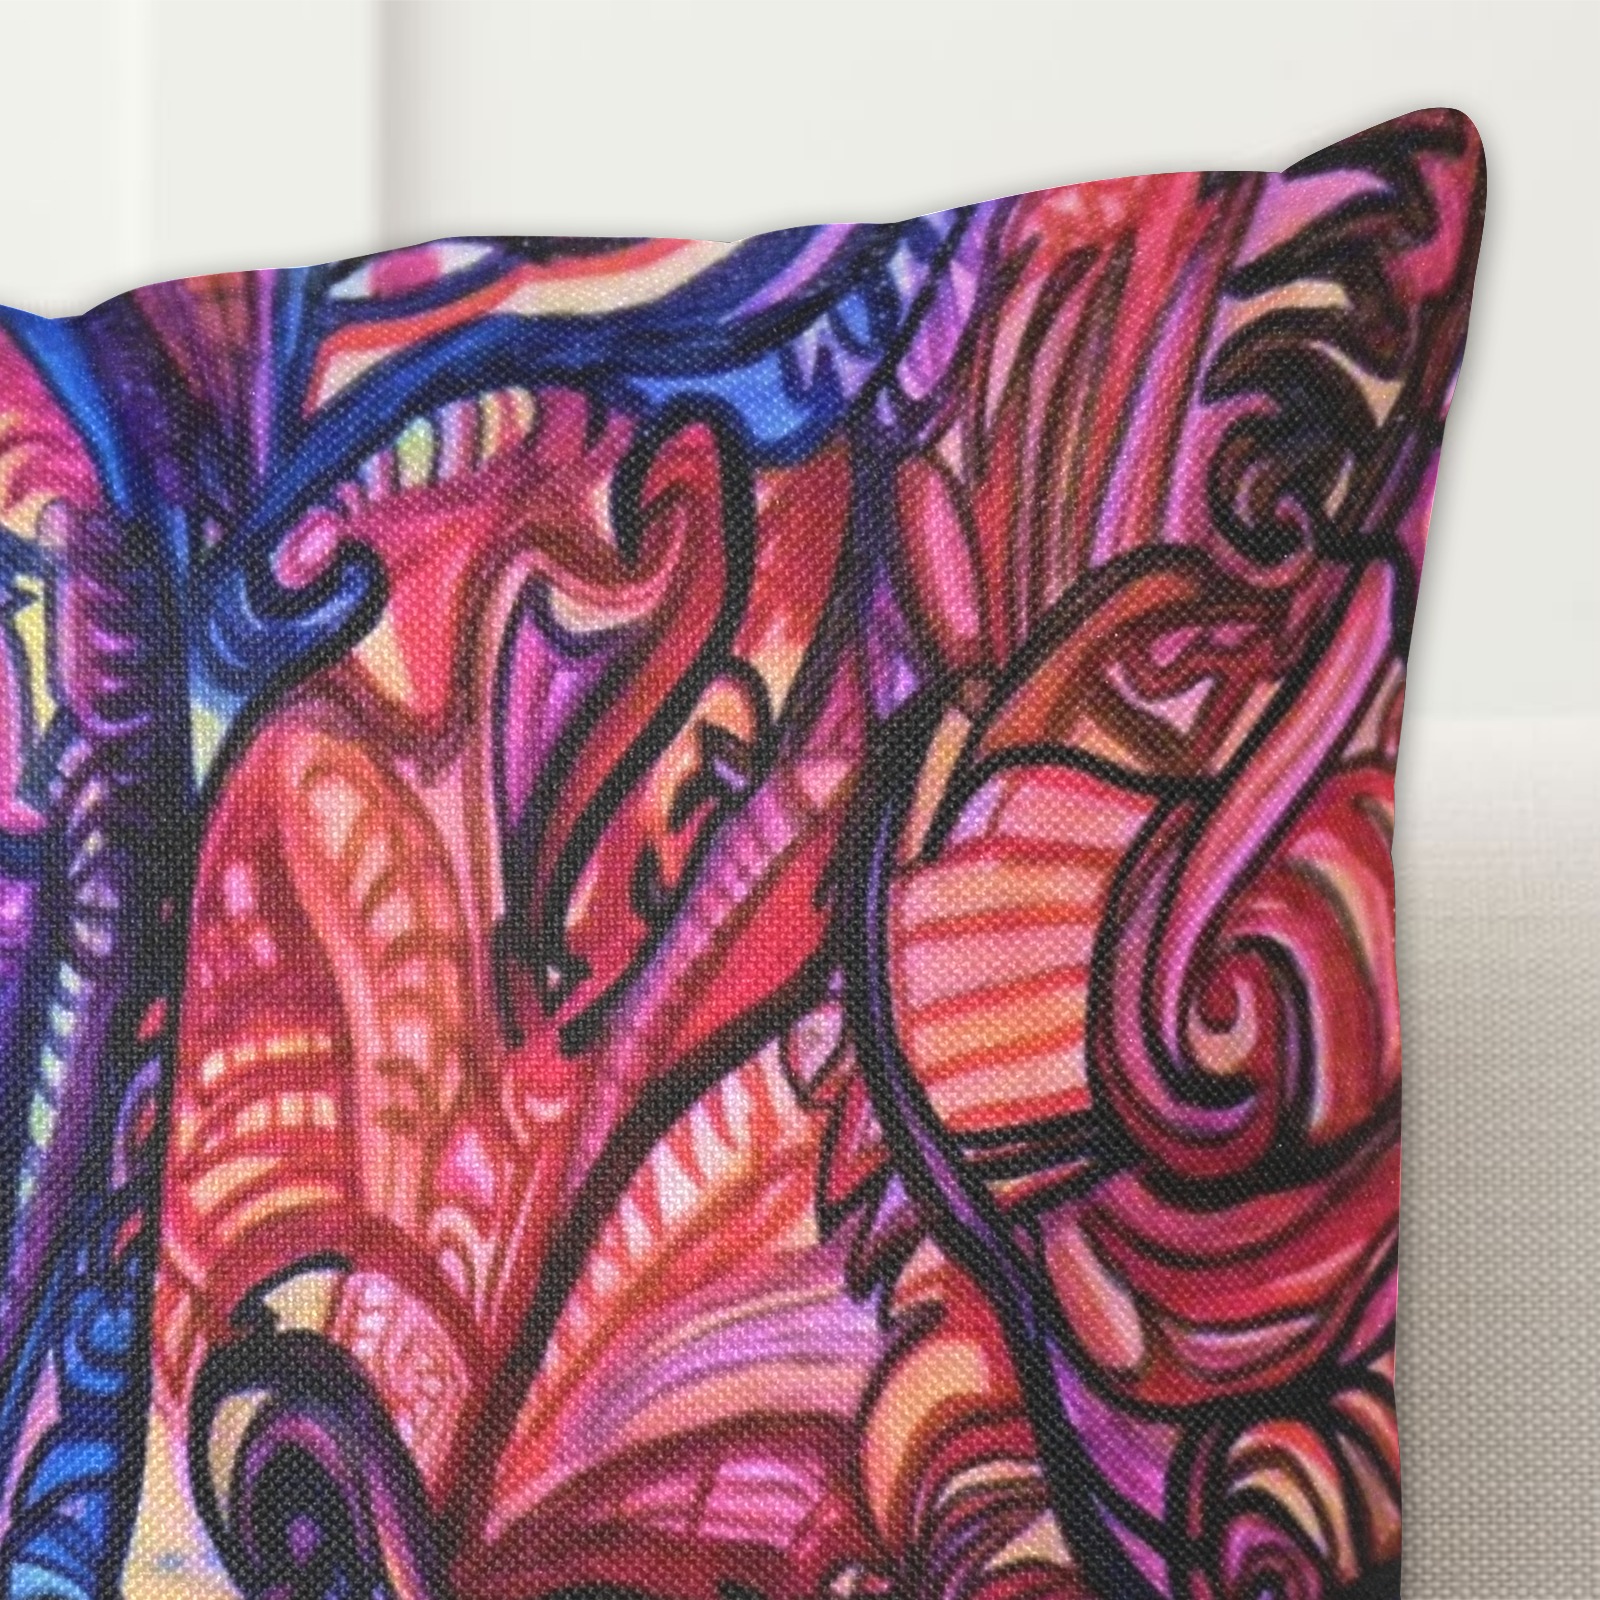 Blue and red abstract graffiti style drawing Linen Zippered Pillowcase 18"x18"(One Side&Pack of 2)